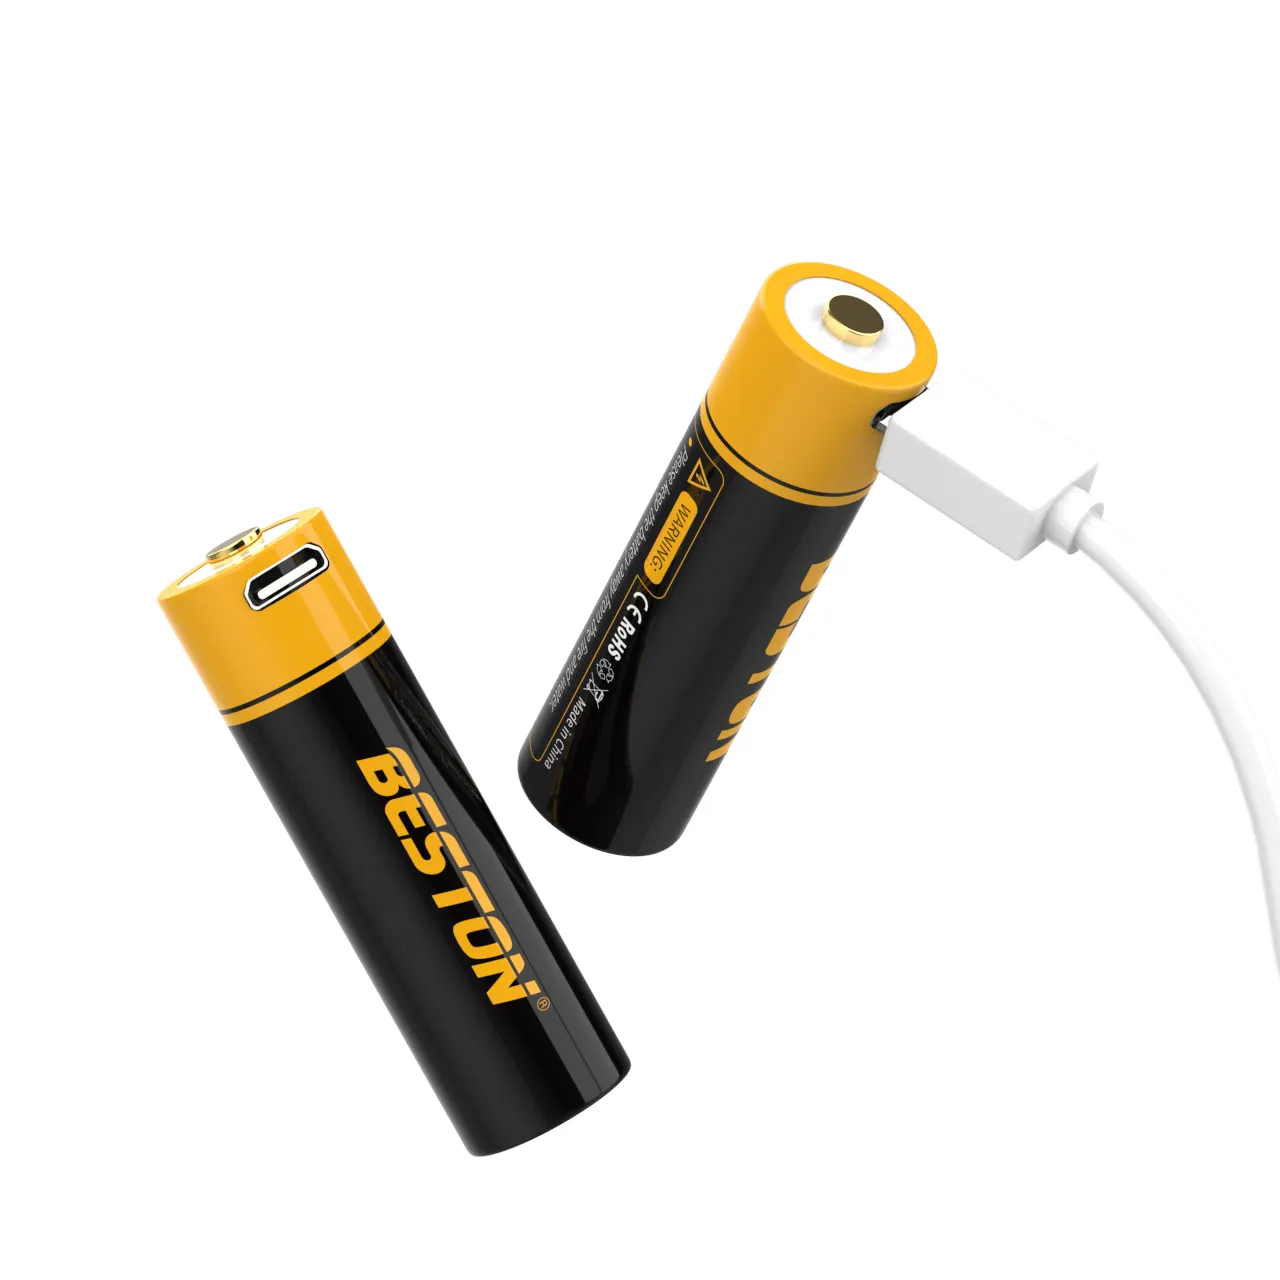 BESTON Factory Price 2pcs 1.5V Rechargeable long life AA battery Micro USB Li-ion 3500mWh battery for Keyboard 1500 Cycle Times